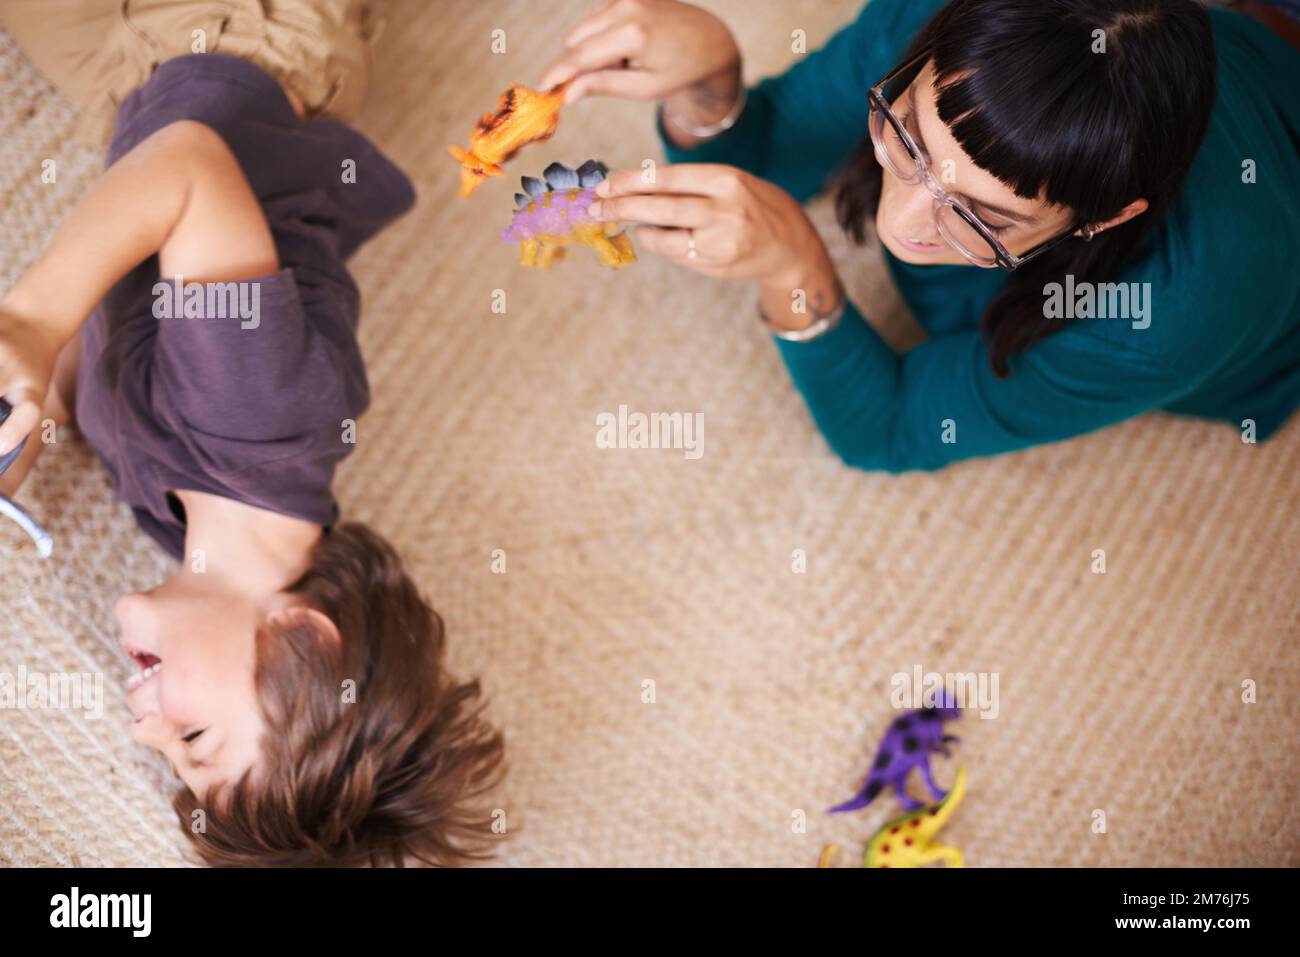 She knows how to make him smile. a mother and her son playing with toy dinosaurs. Stock Photo